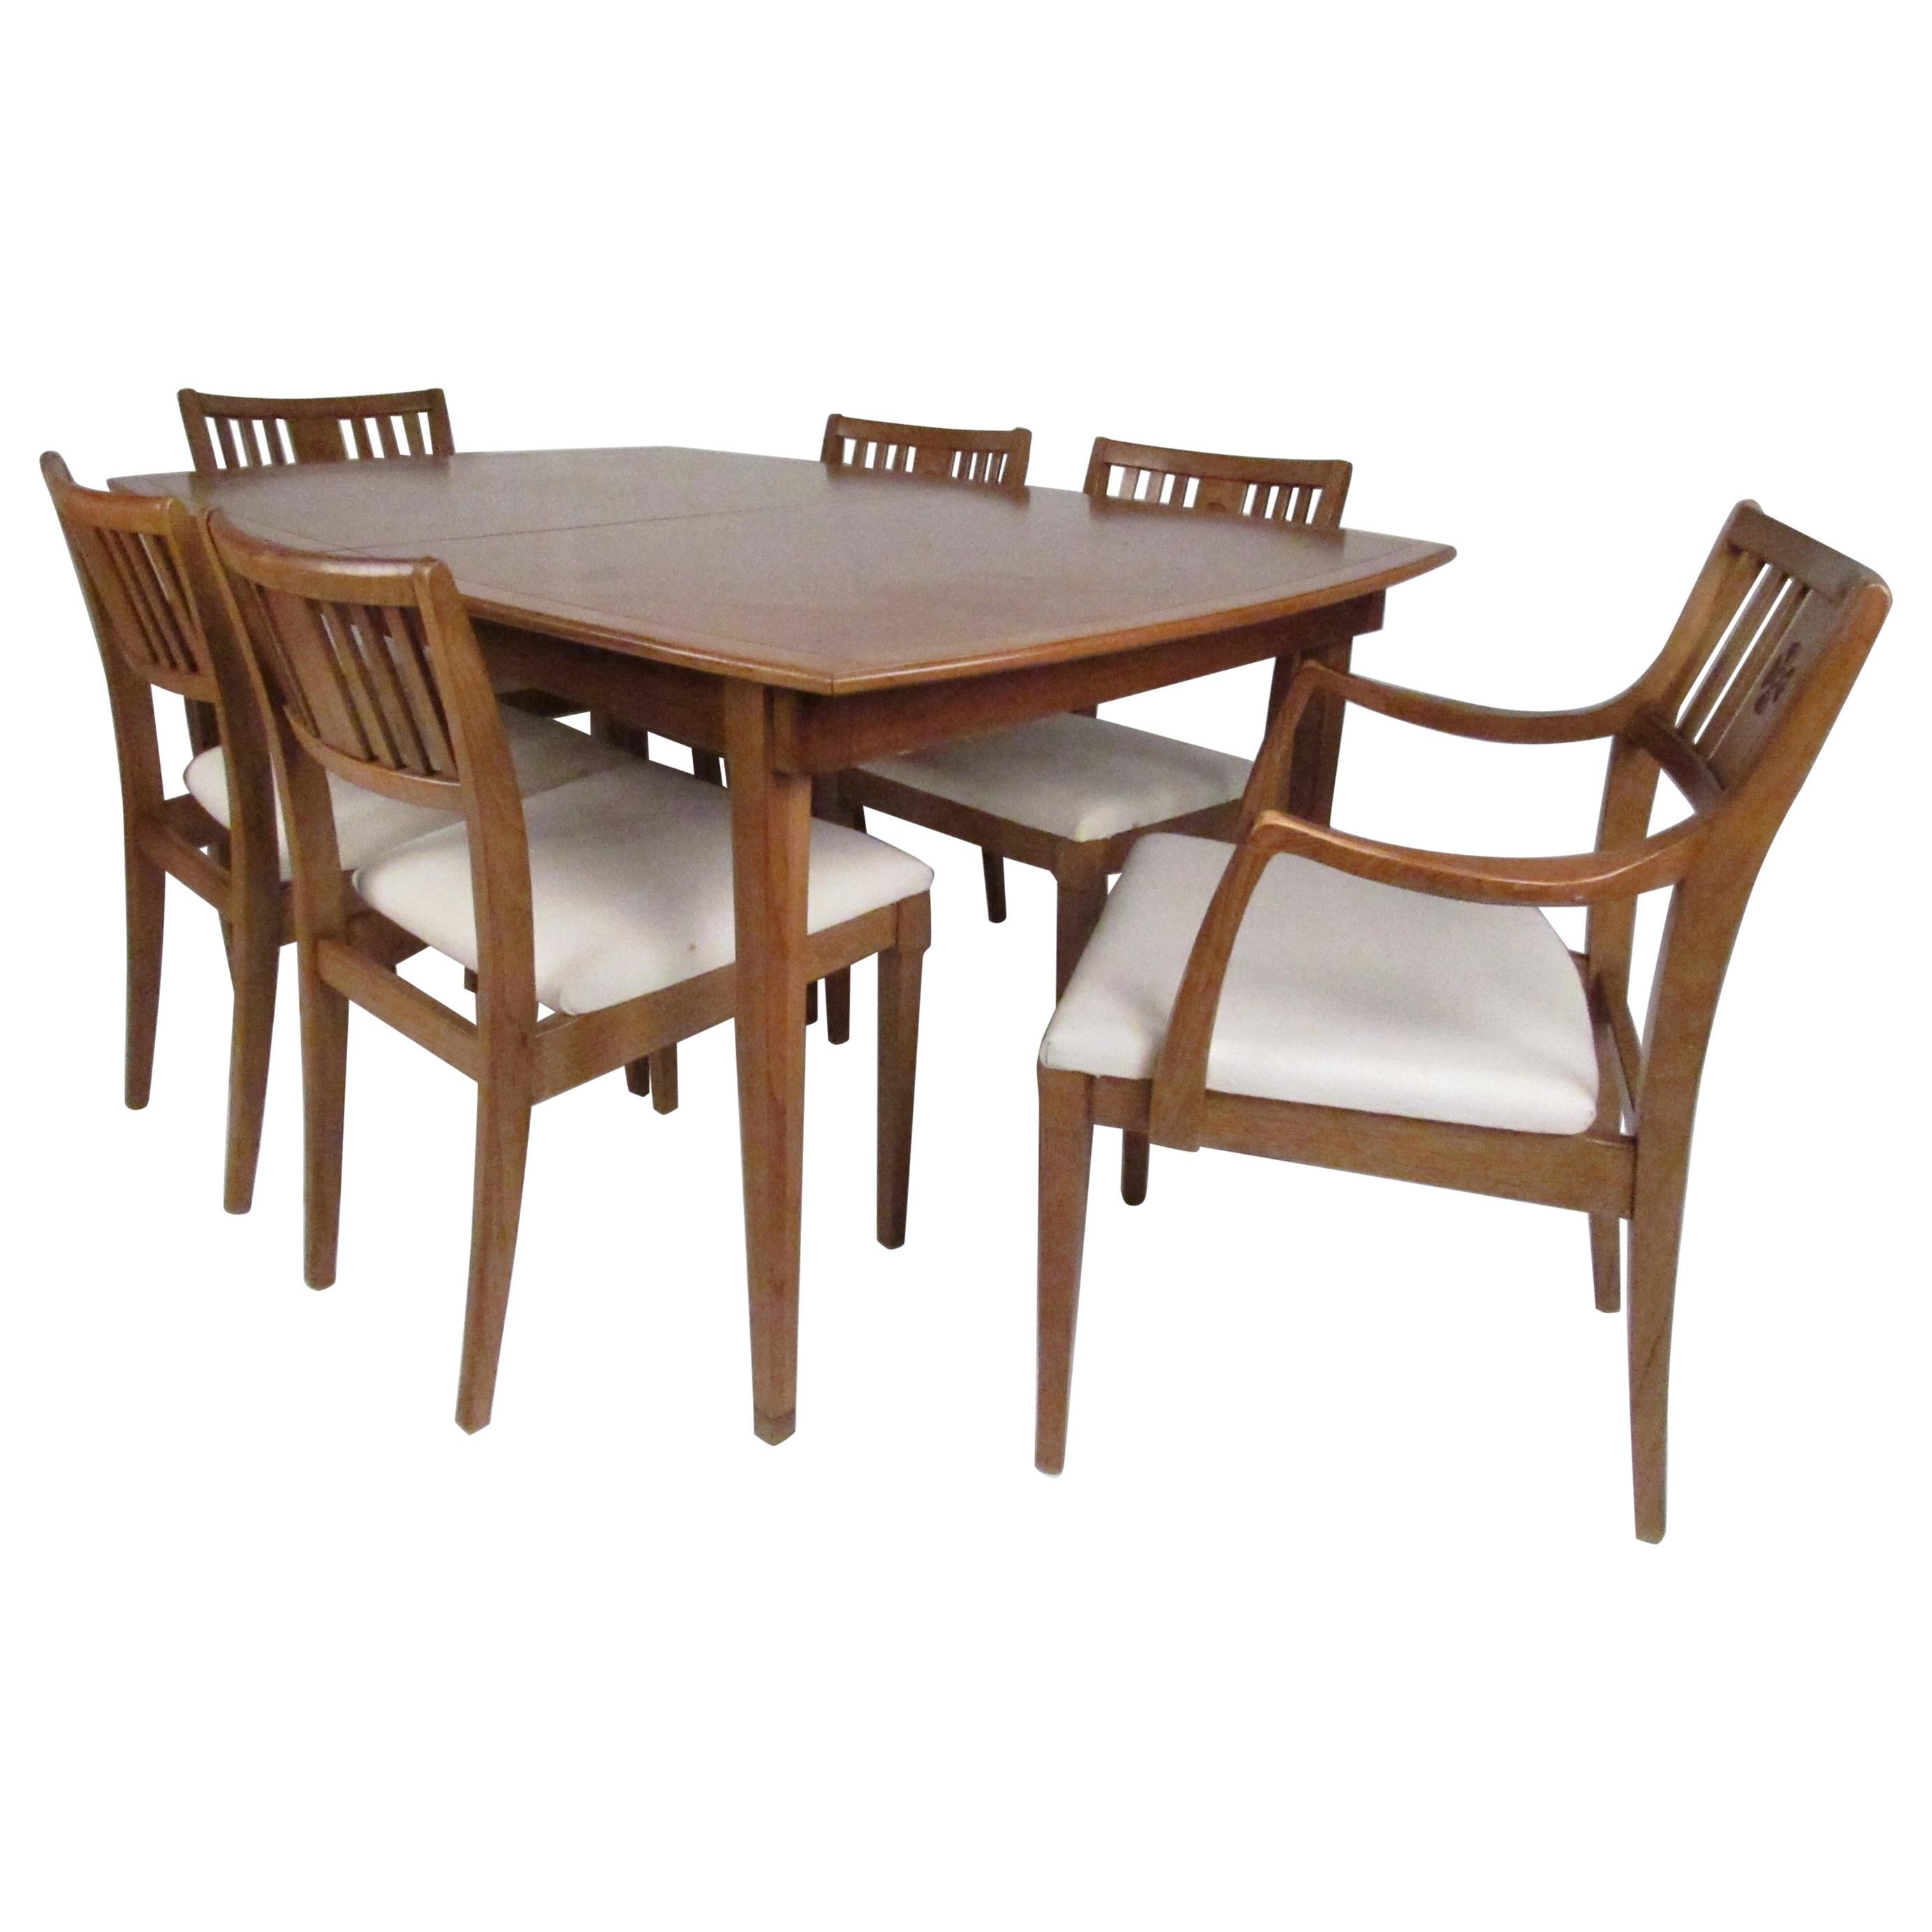 Midcentury "Artistry" Dining Table and Chairs by Drexel For Sale